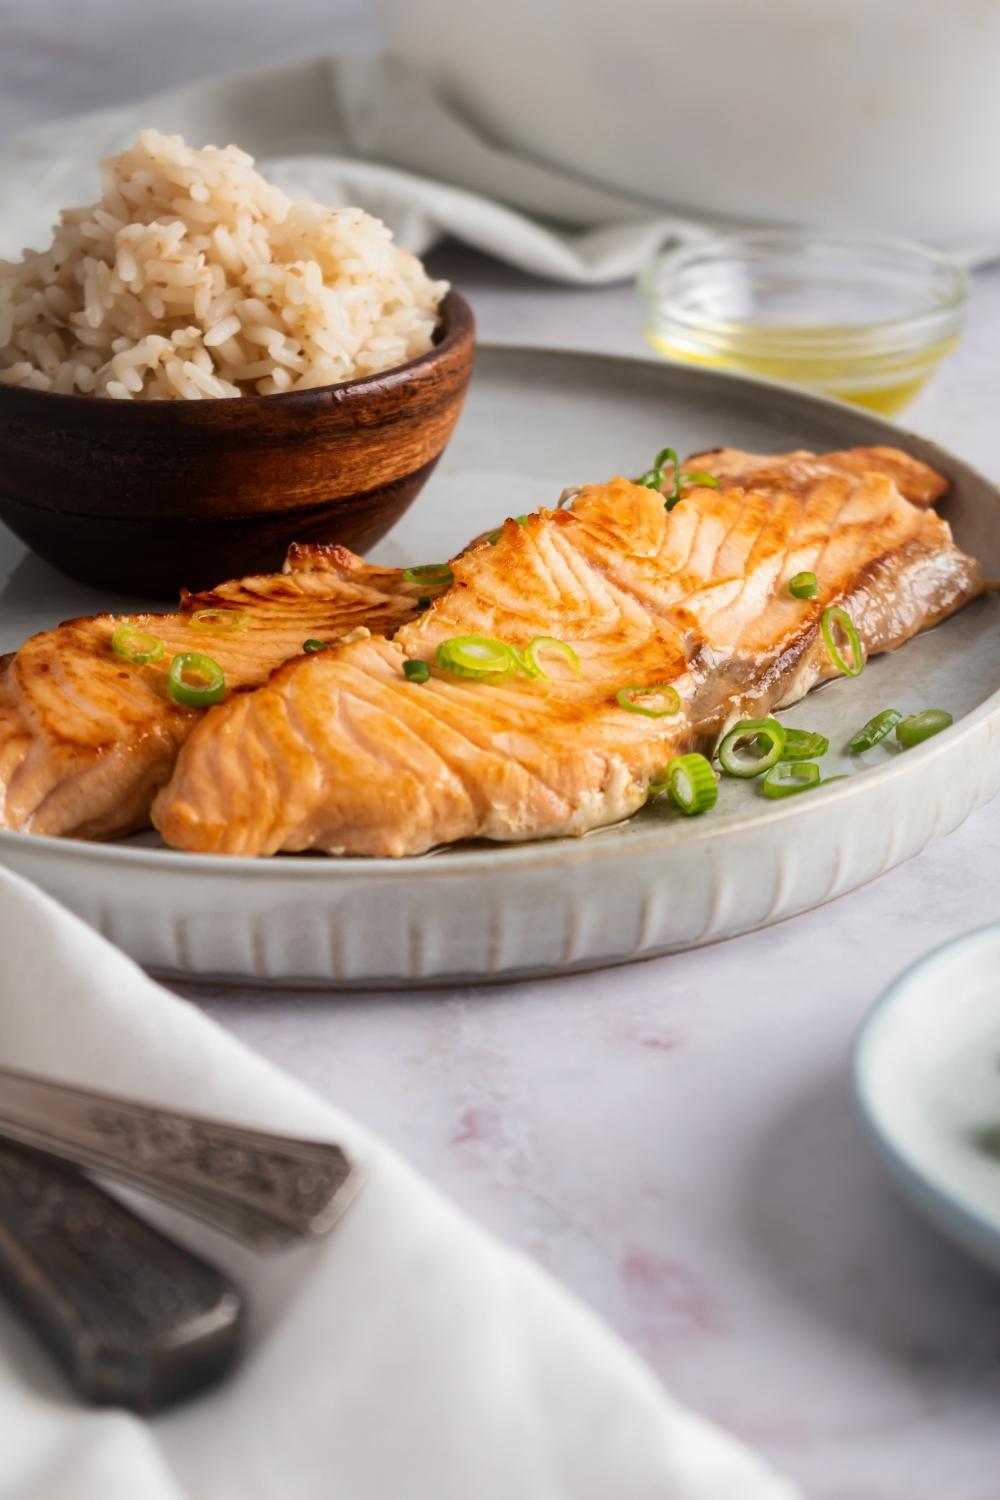 Two fillets of longhorn salmon on a gray plate that has a wooden bowl filled with rice on it.